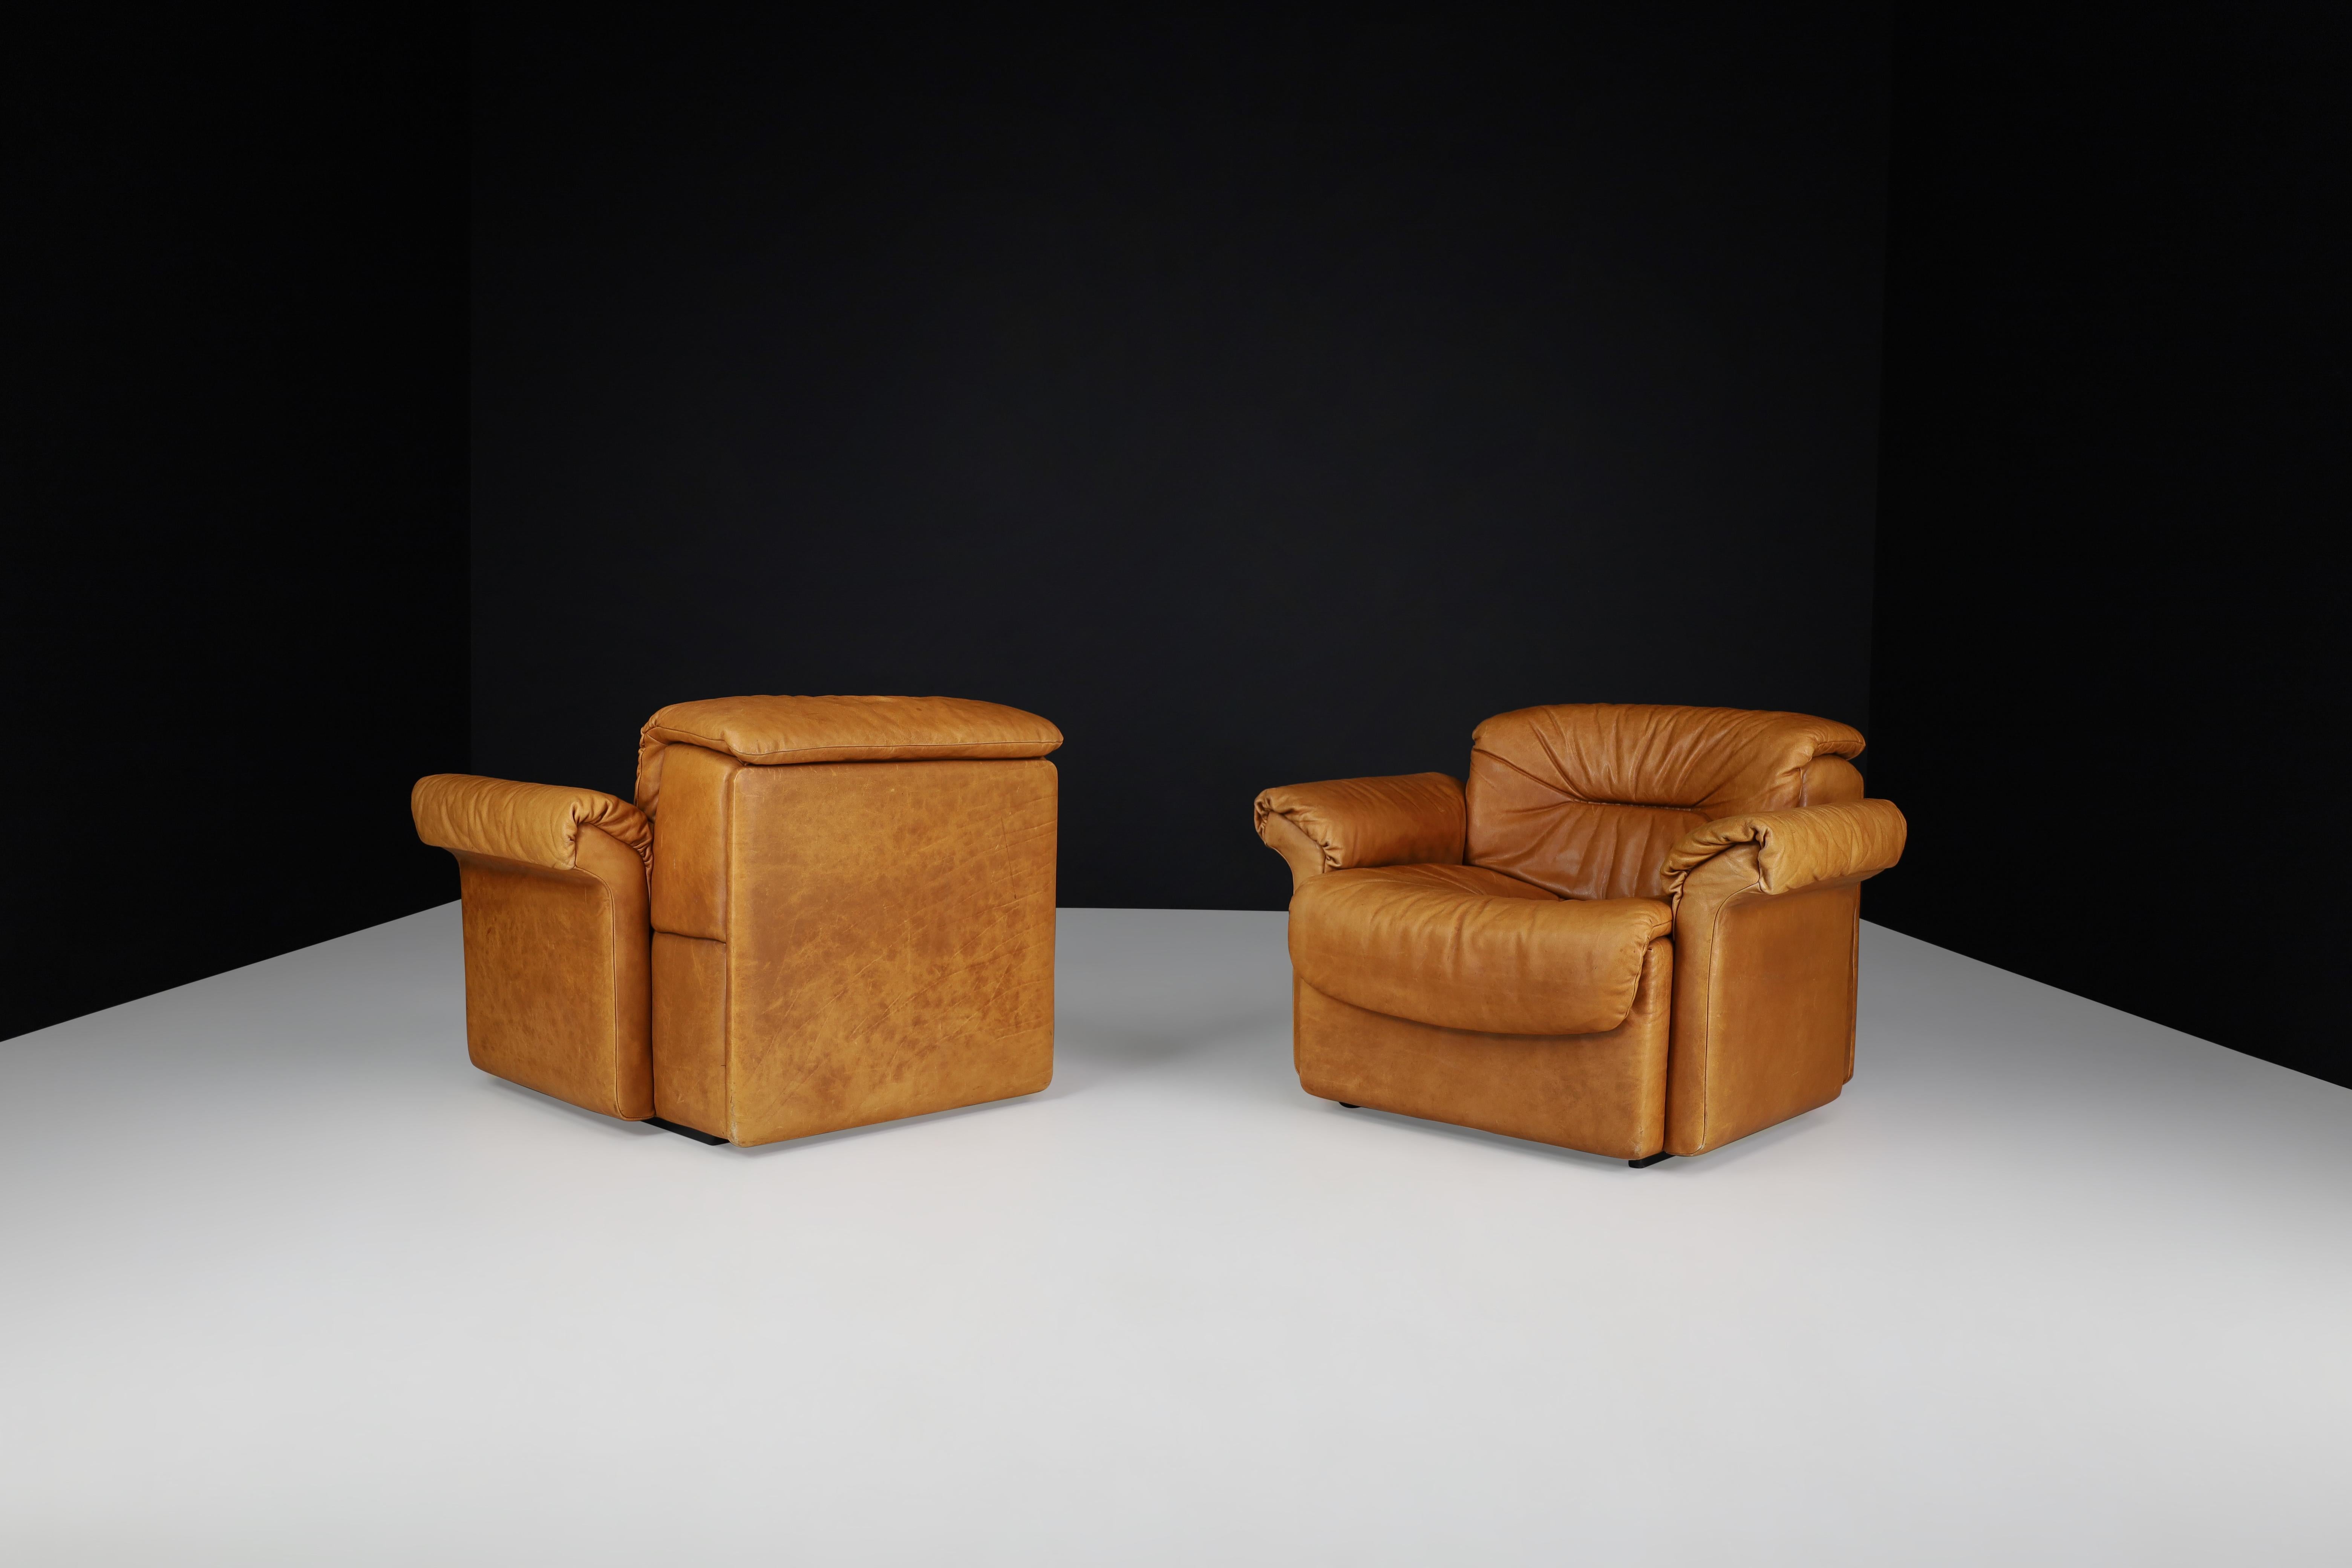 Swiss De Sede DS 14 Lounge Chairs in Patinated Cognac Leather, Switzerland, 1970s For Sale